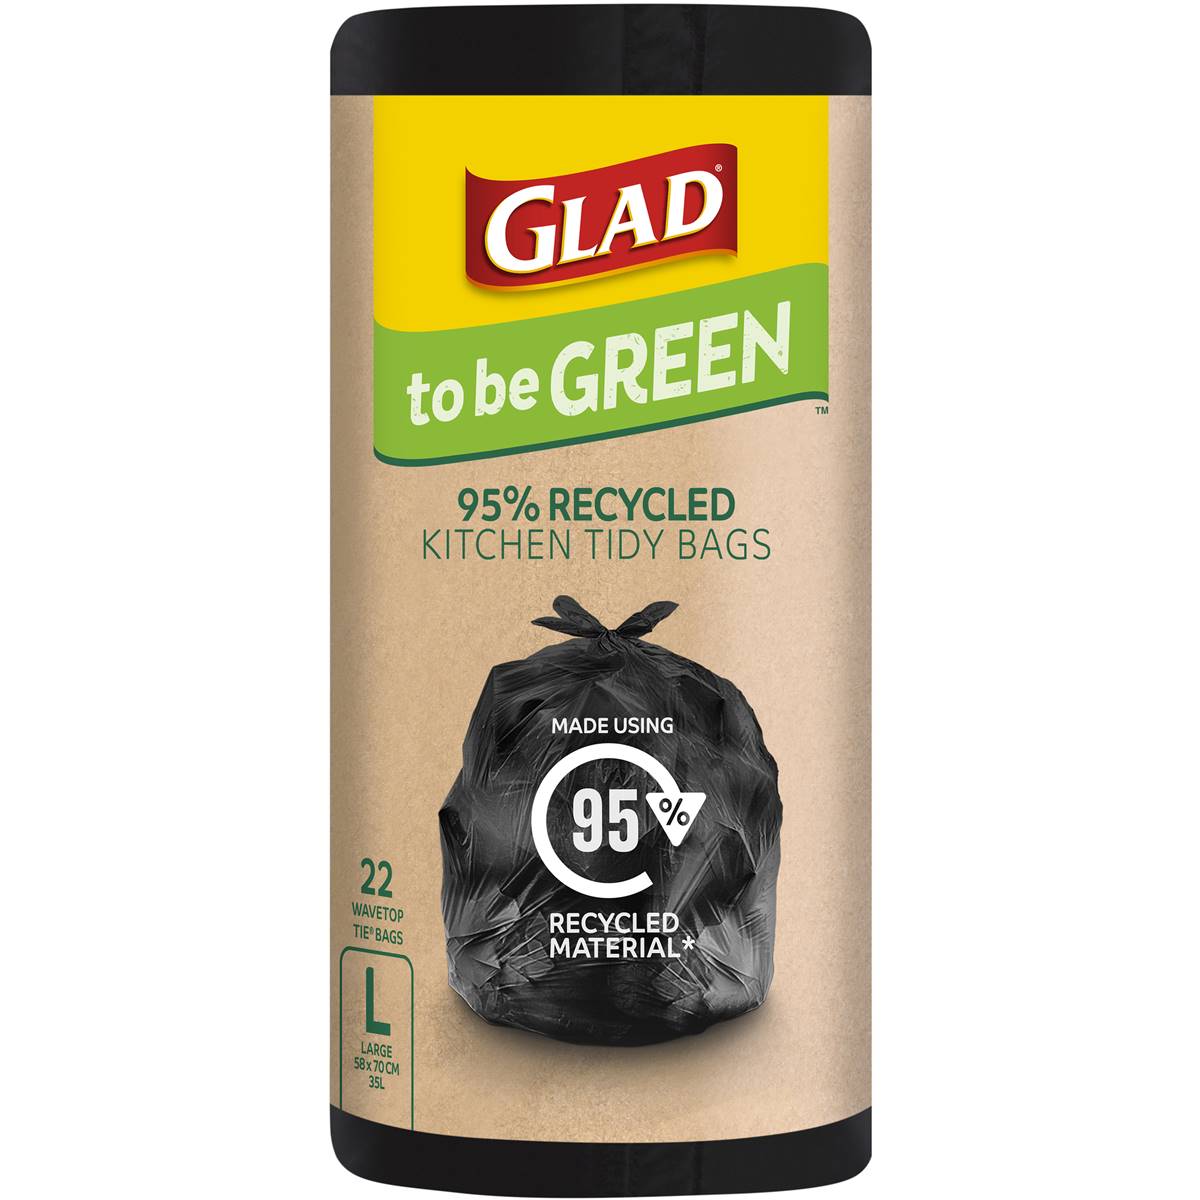 Glad 95% Recycled Kitchen Tidy Bags Large 22 Pack